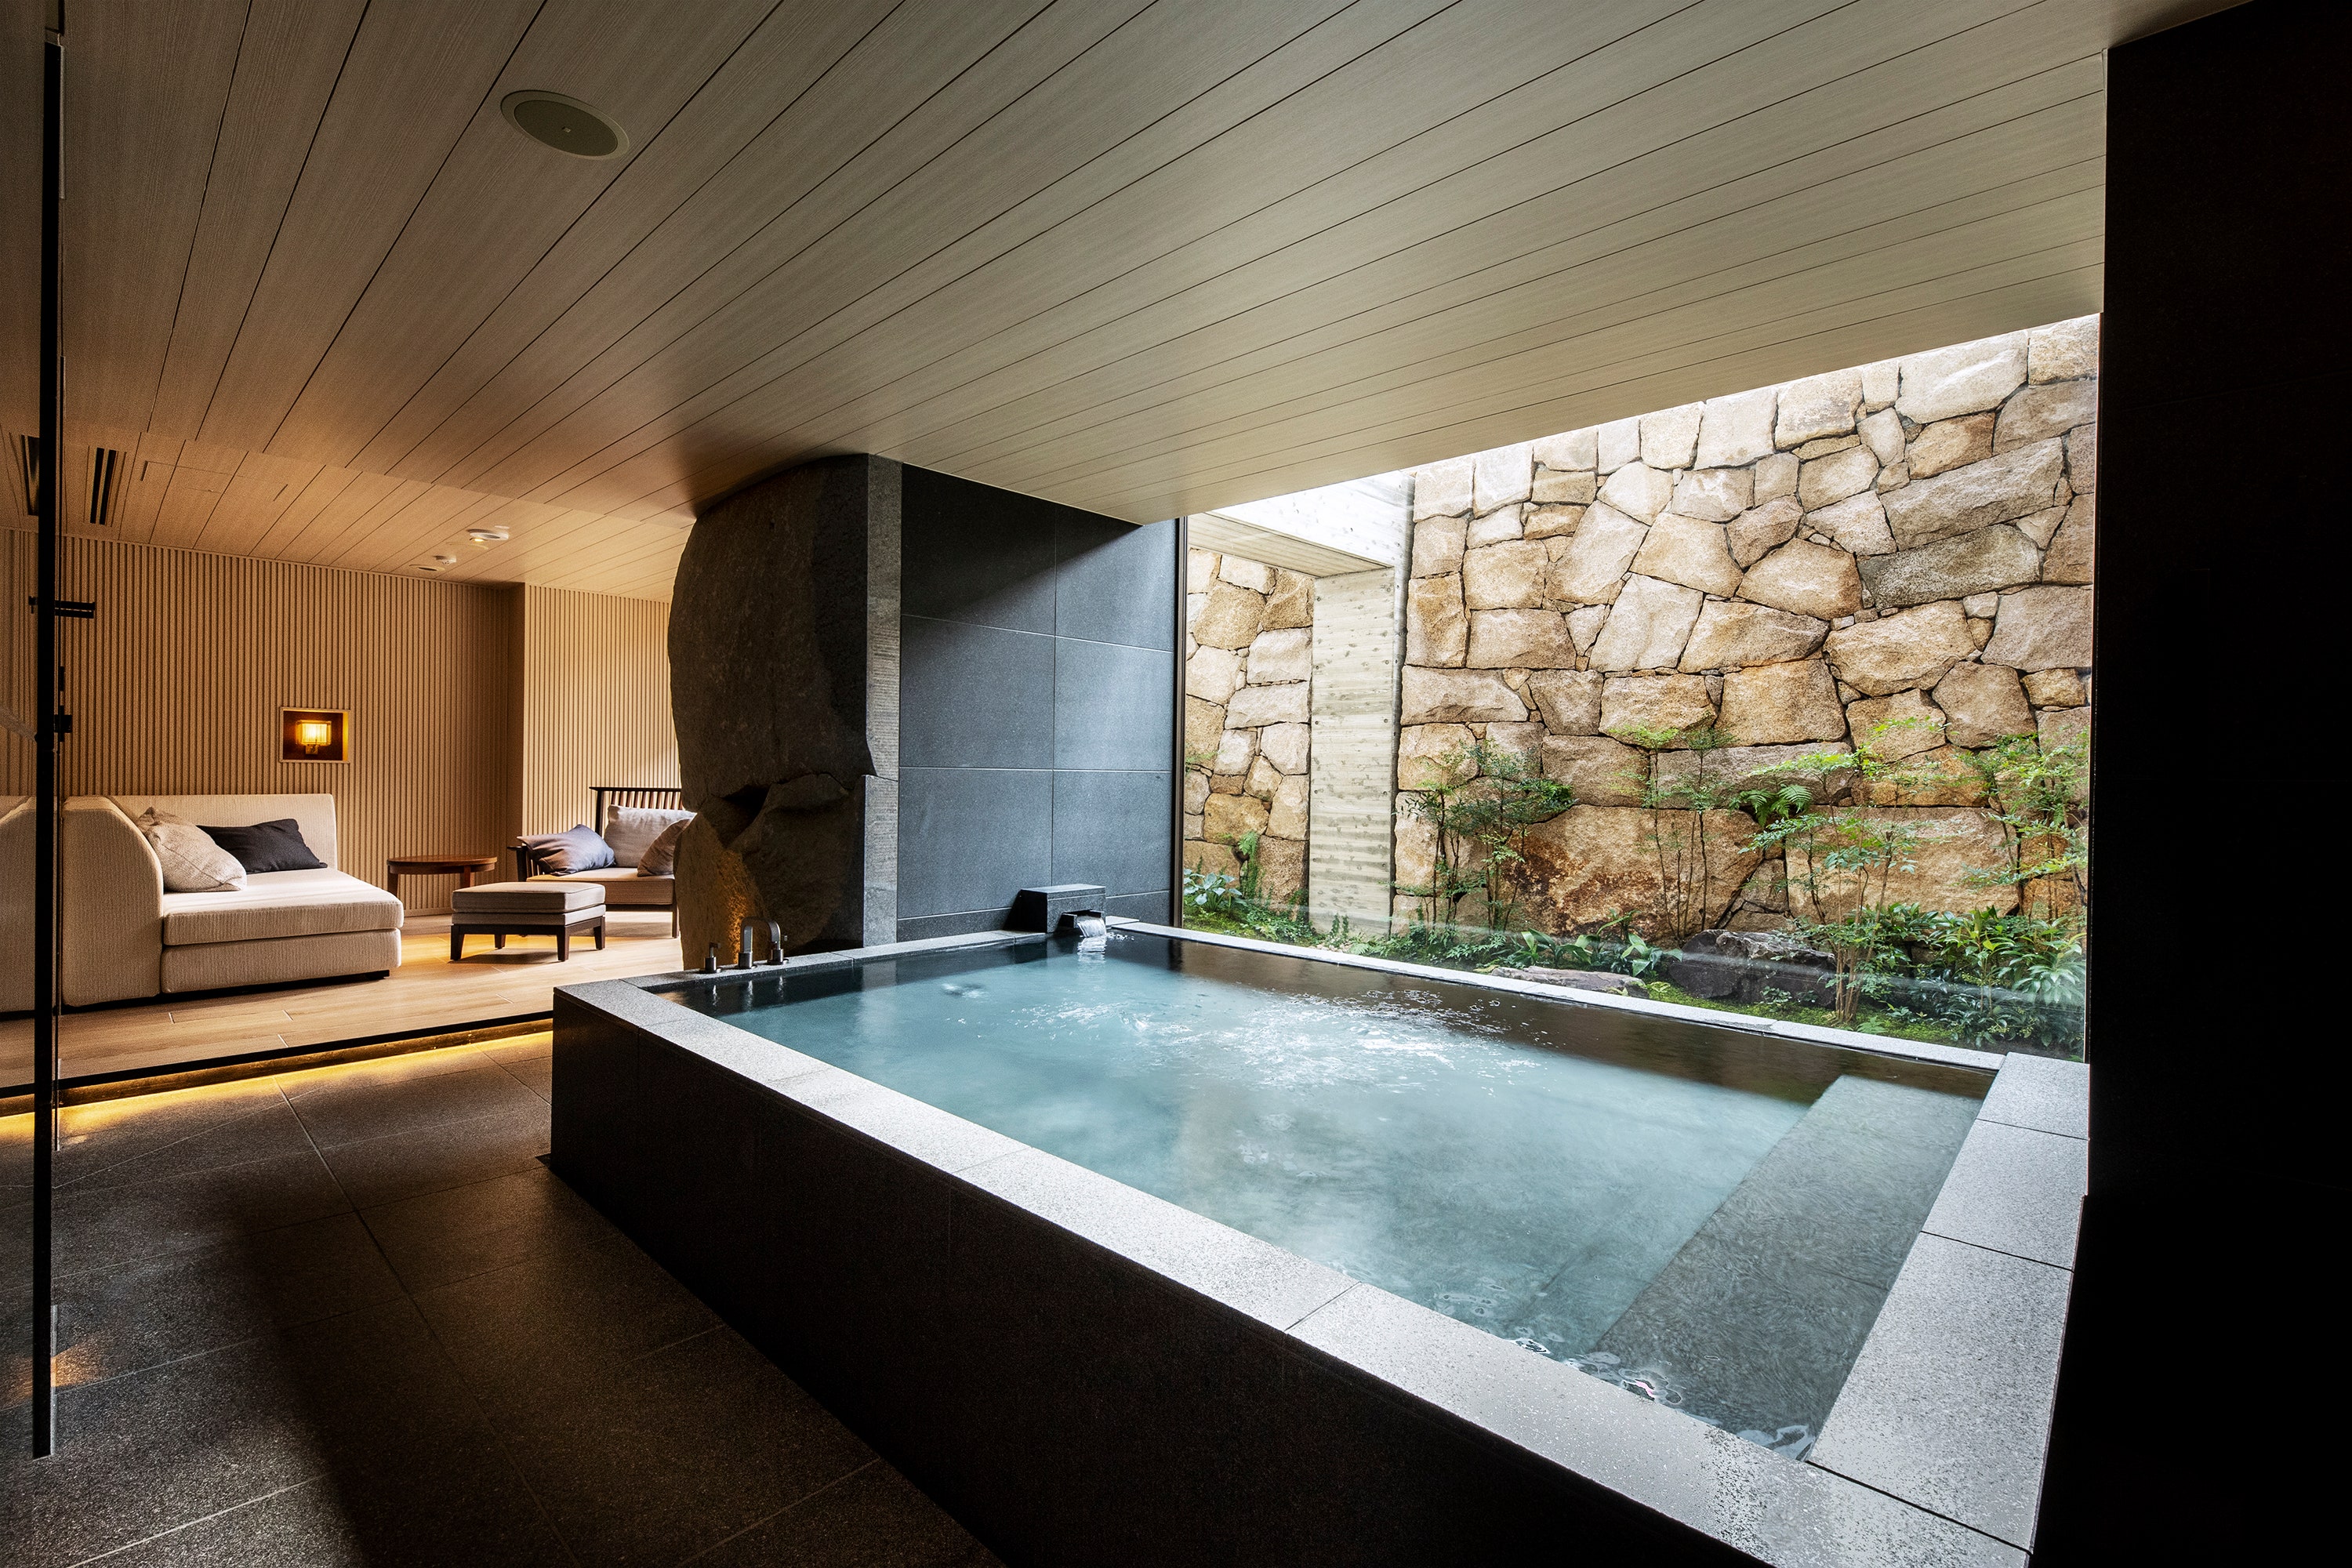 Believed to have healing properties due to their mineral-rich waters, Japanese onsen baths (hot springs) are an integral part of Japanese culture. In the <a href="https://www.hotelthemitsui.com/en/kyoto/rooms-suites/onsen-suite/">Onsen Suite</a> at Hotel The Mitsui, you can experience the ancient wellness practice in your room with an onsen bath on your private outdoor patio. Surrounded by stone lanterns and an intimate Japanese garden, the bath filled with natural spring water sourced onsite is a quiet reprieve in the heart of Kyoto. The Zen atmosphere continues inside the 1087-square-foot suite with separate living and bedroom areas decorated with natural woods.<p>Sign up for our newsletter to get the latest in design, decorating, celebrity style, shopping, and more.</p><a href="https://www.architecturaldigest.com/newsletter/subscribe?sourceCode=msnsend">Sign Up Now</a>